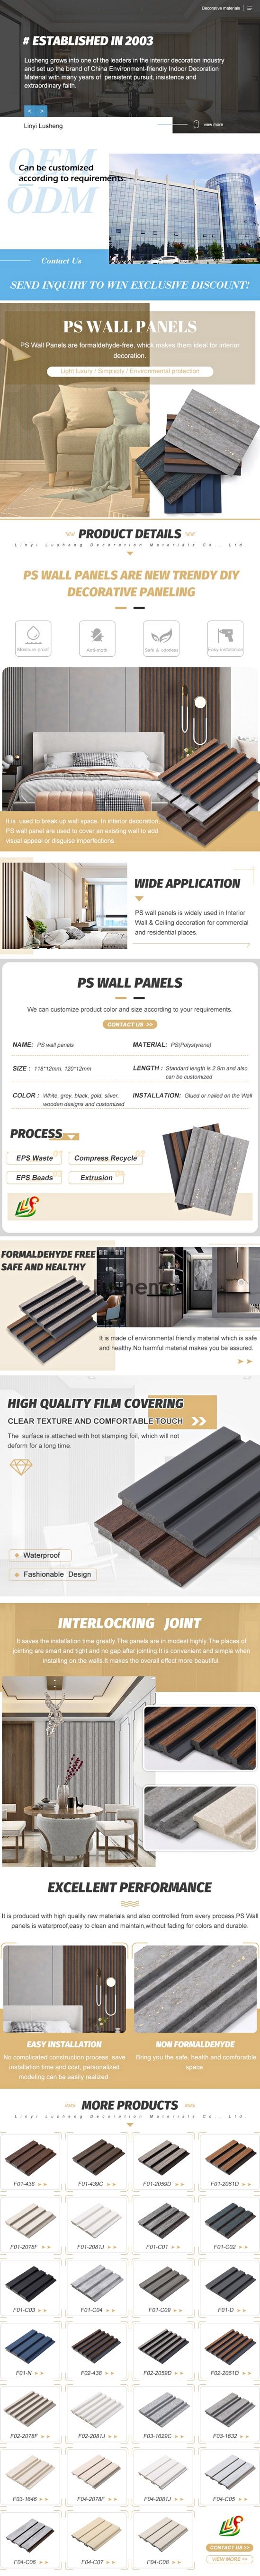 waterproof material 3d pvc and ps wood paneling for interior walls(图1)